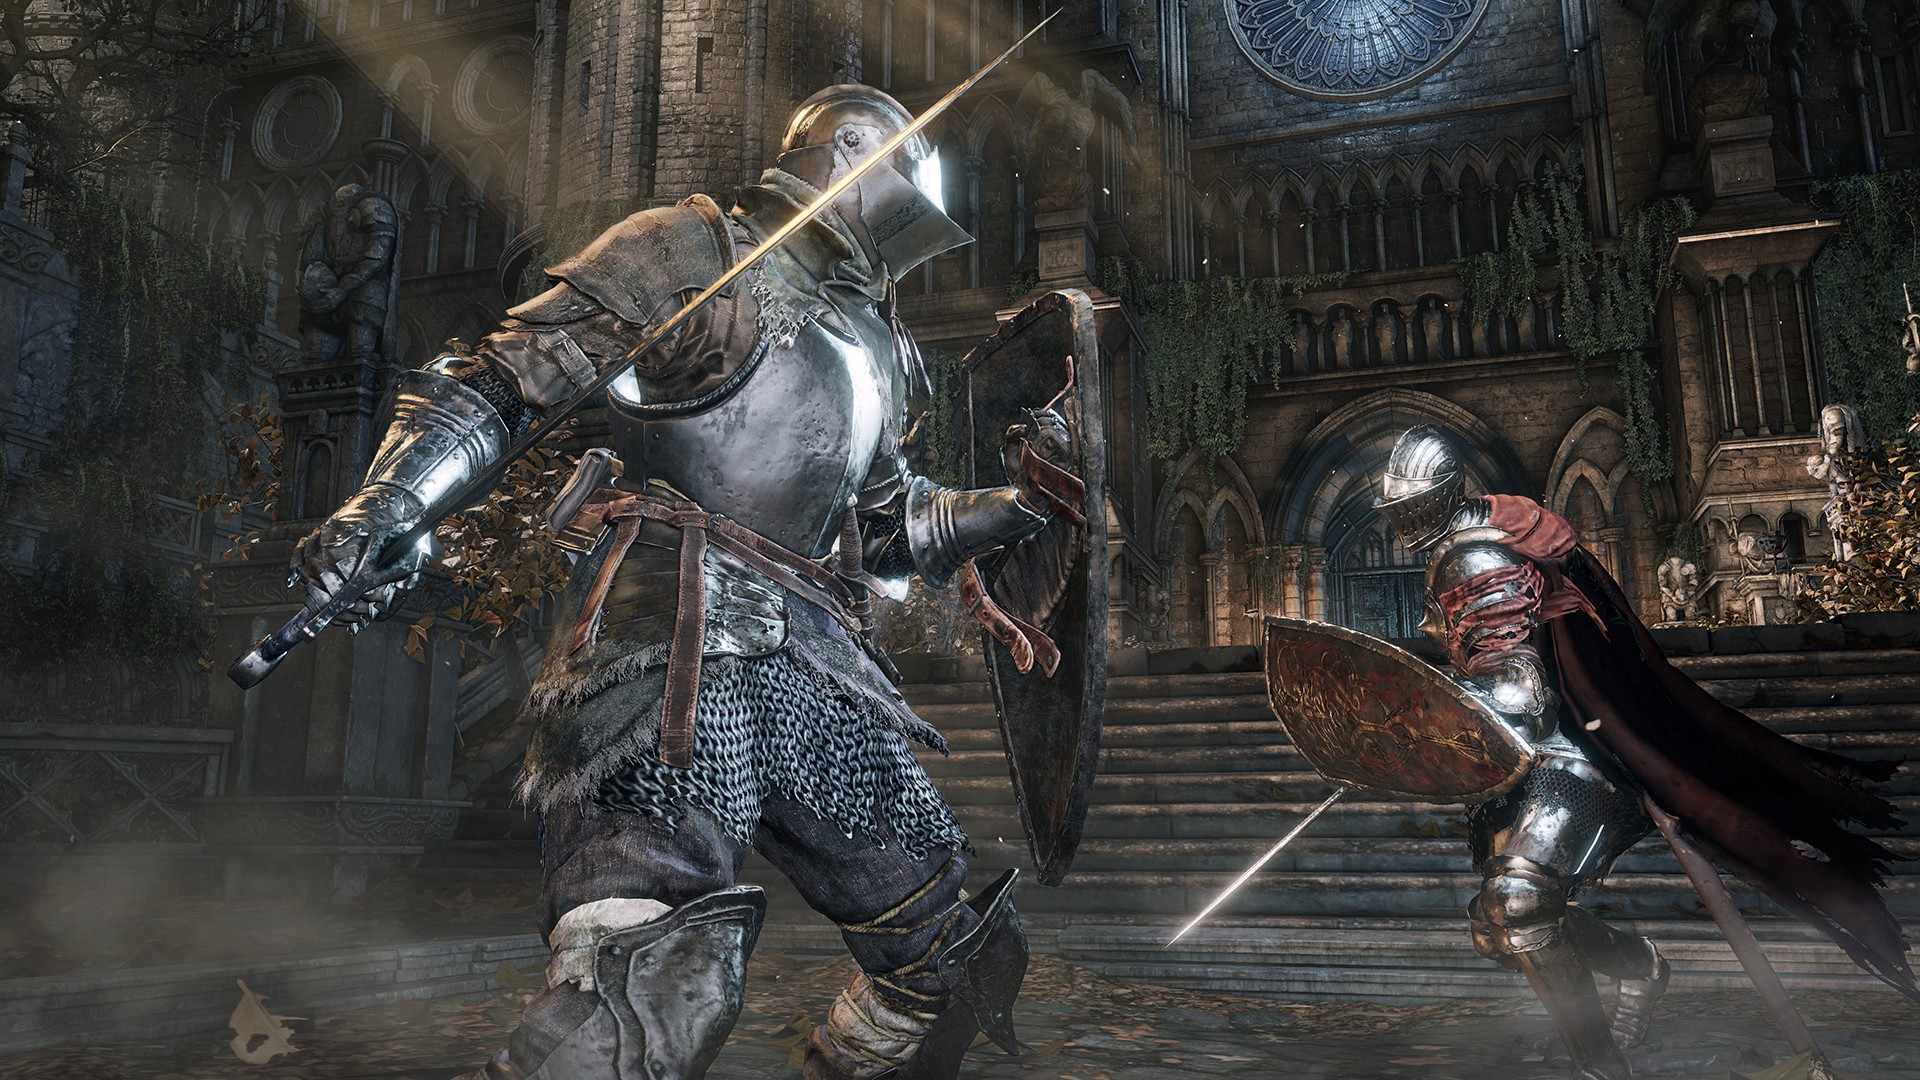 Dark Souls 3 PC servers are down again, after just a month